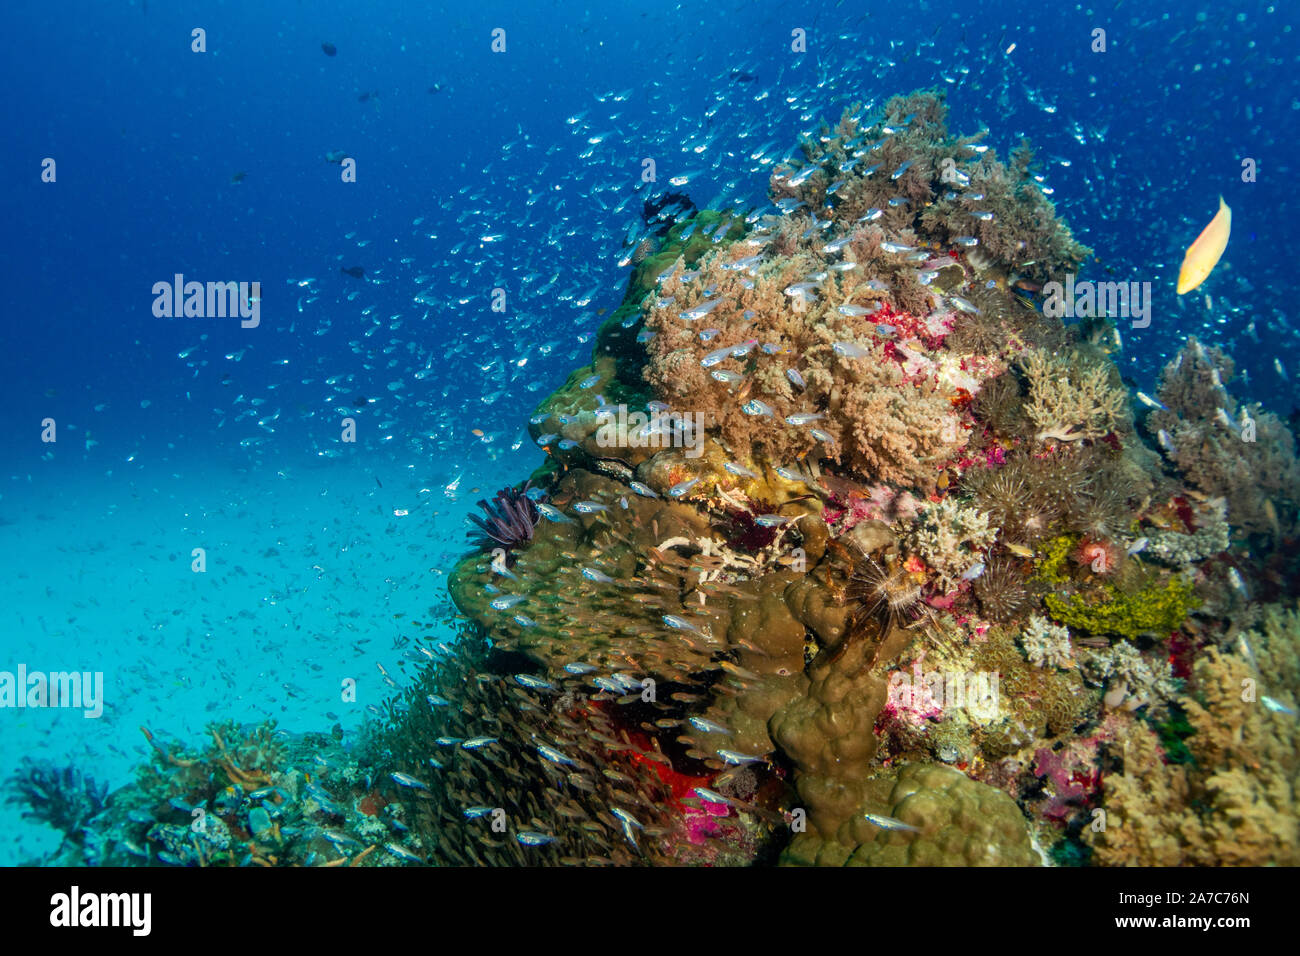 A school of glass fish swimming around a coral bommie Stock Photo